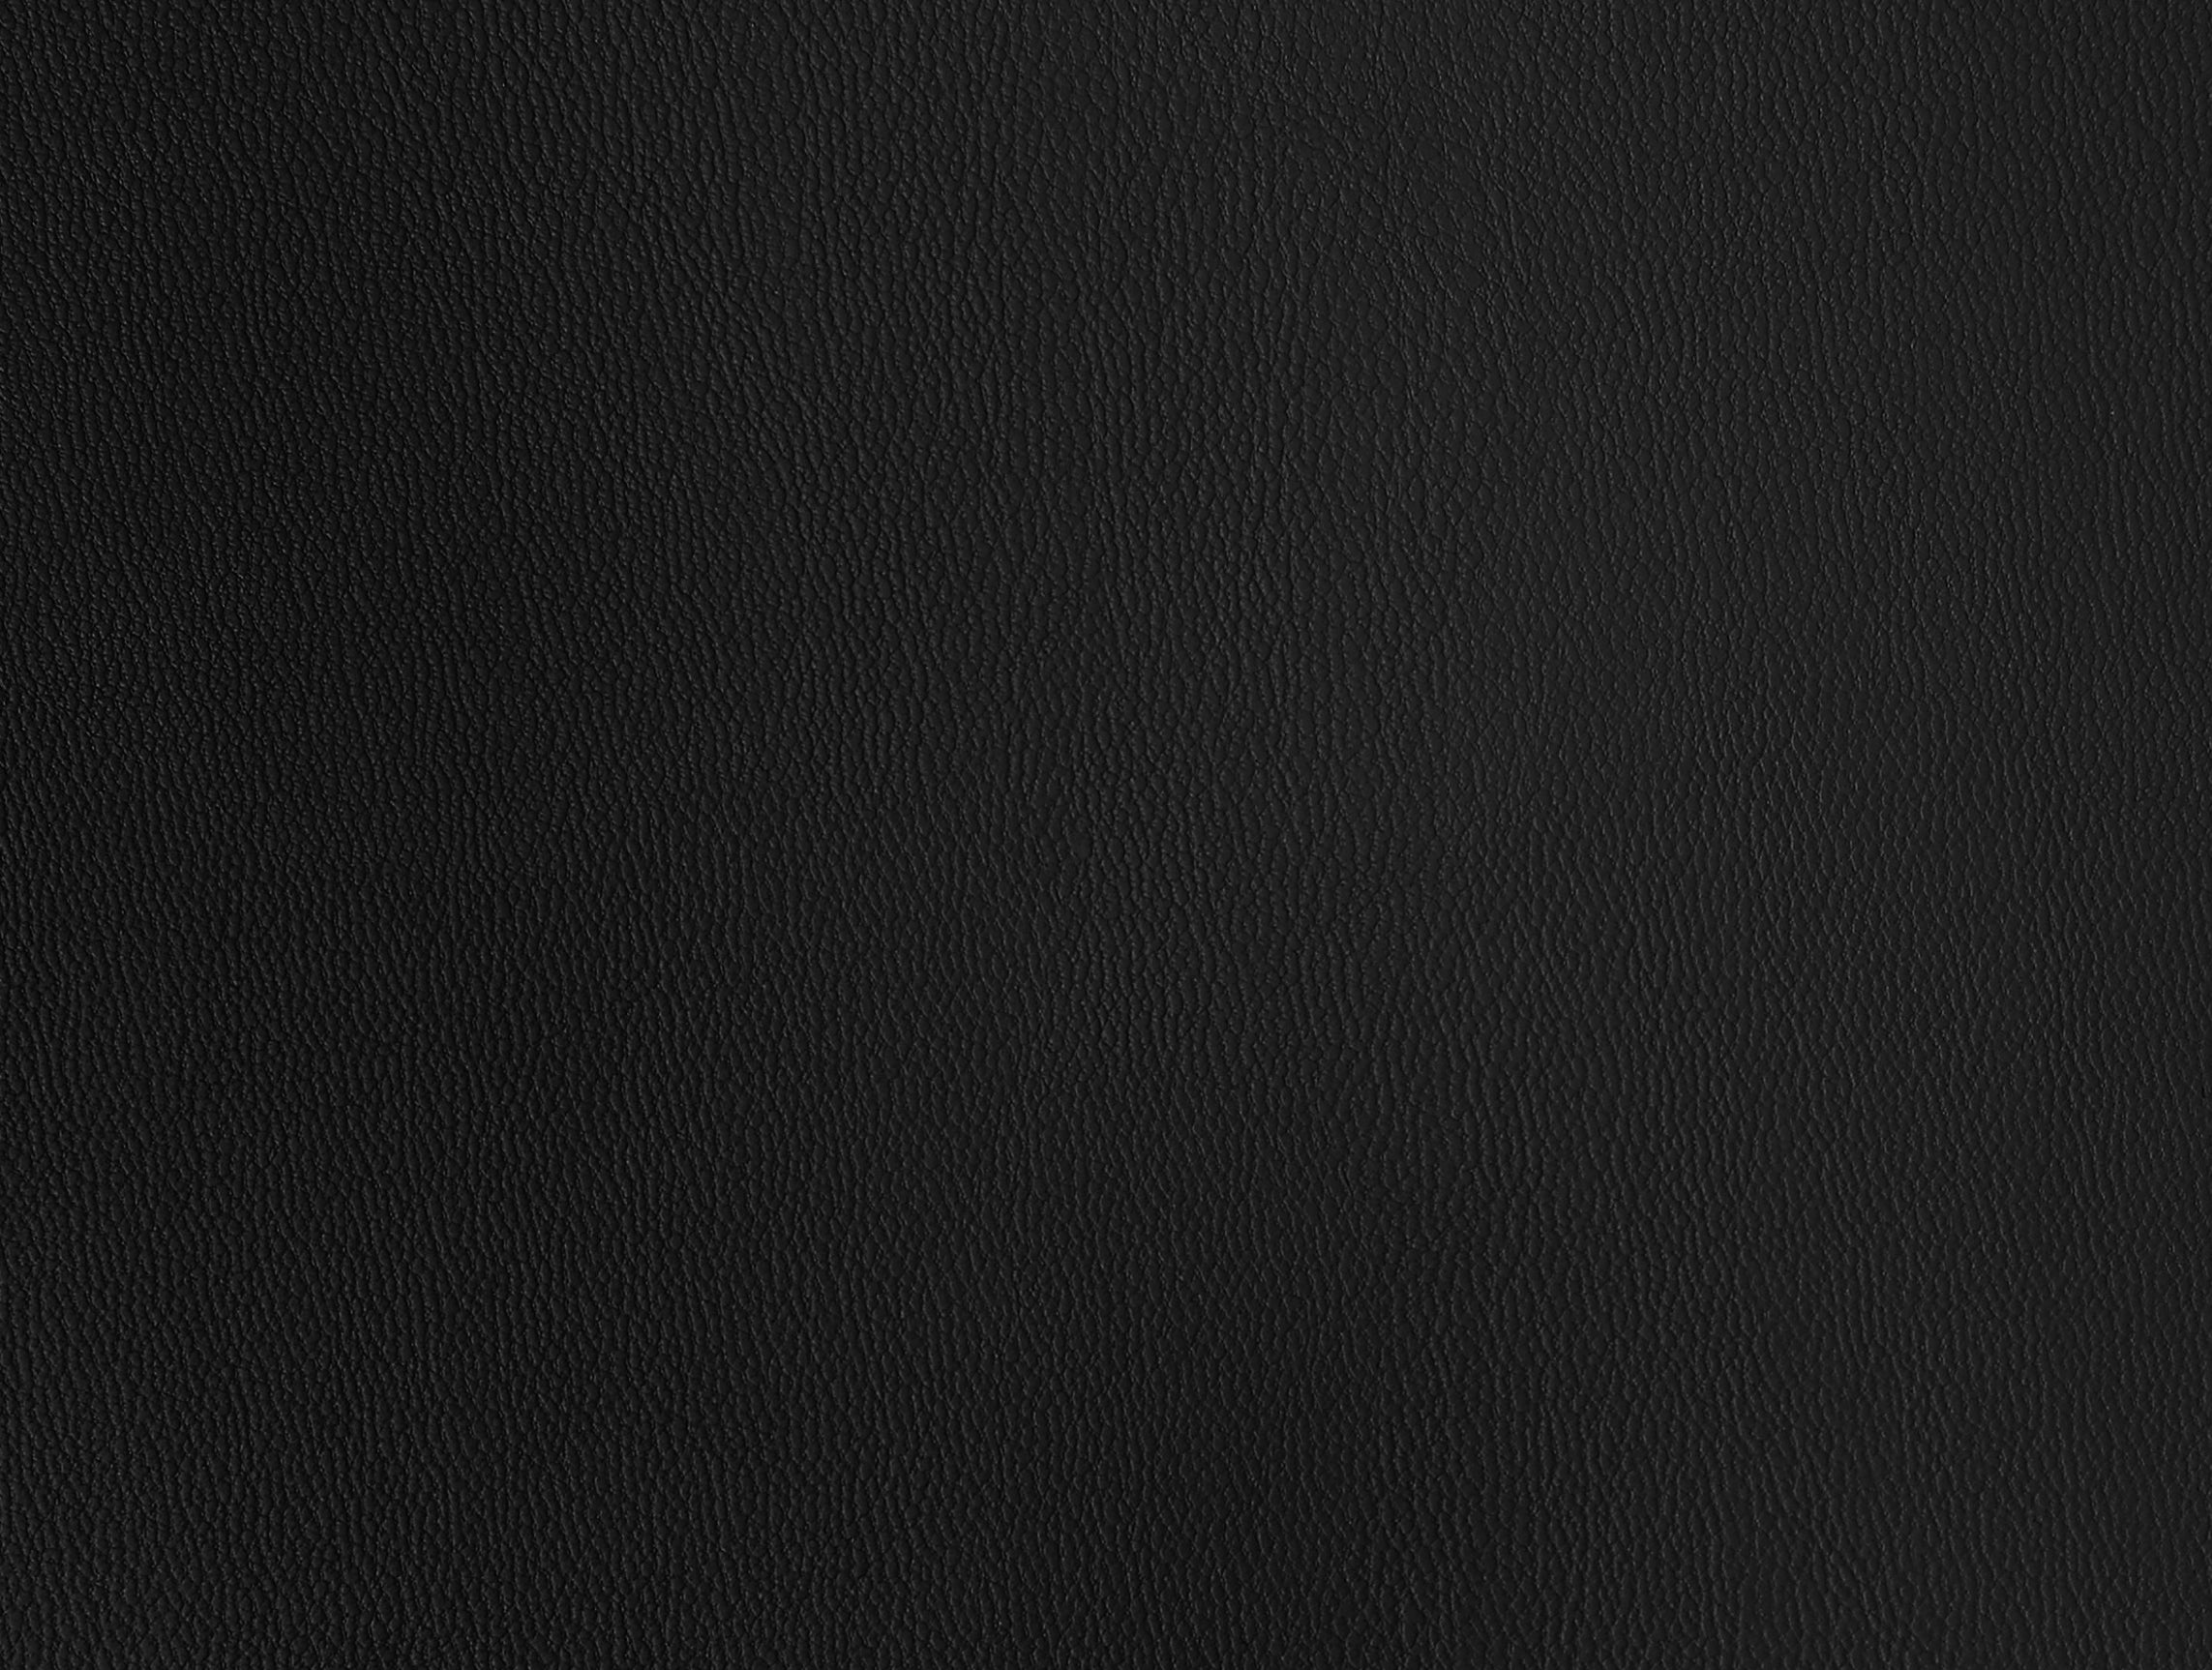 Banbū Leather in Banbū Leather in Black image 1